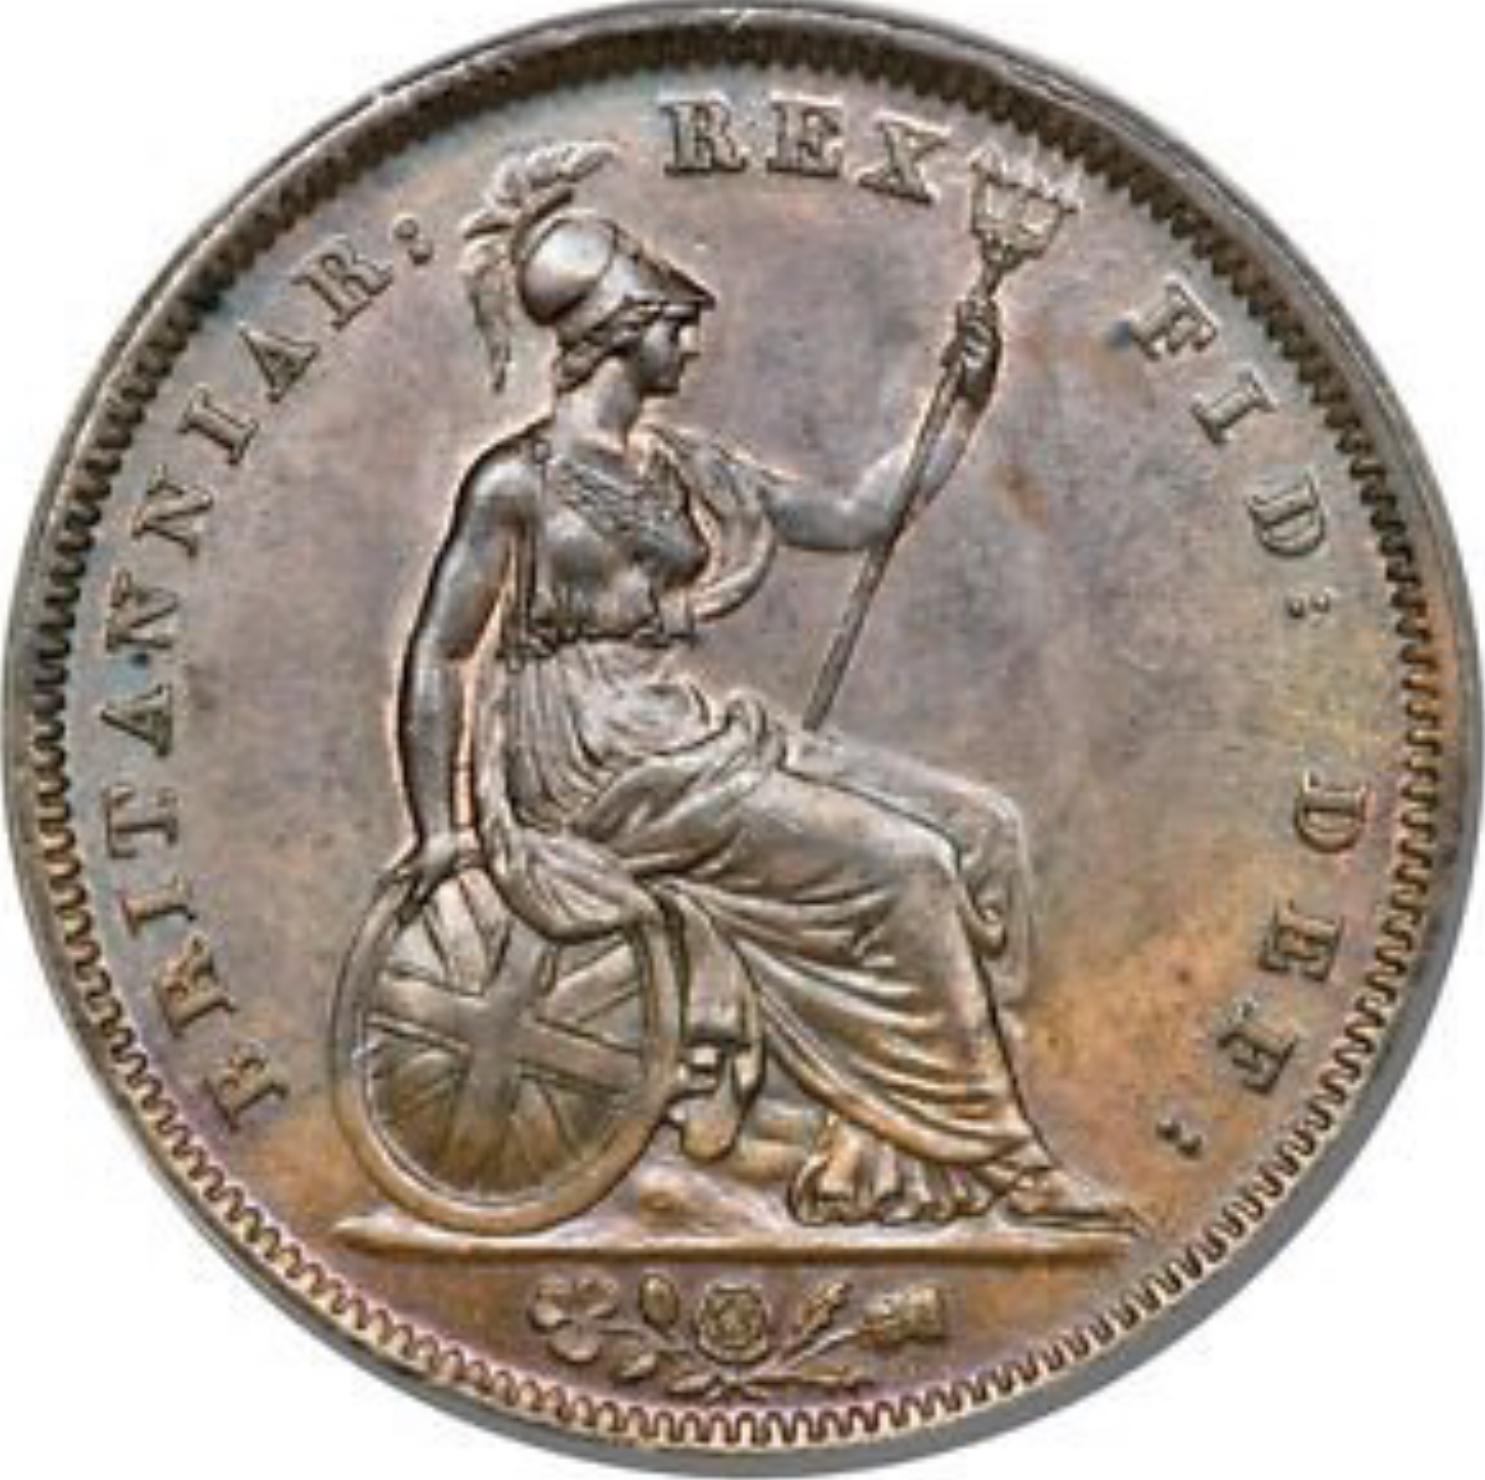 Image of a historical document or a vintage coin